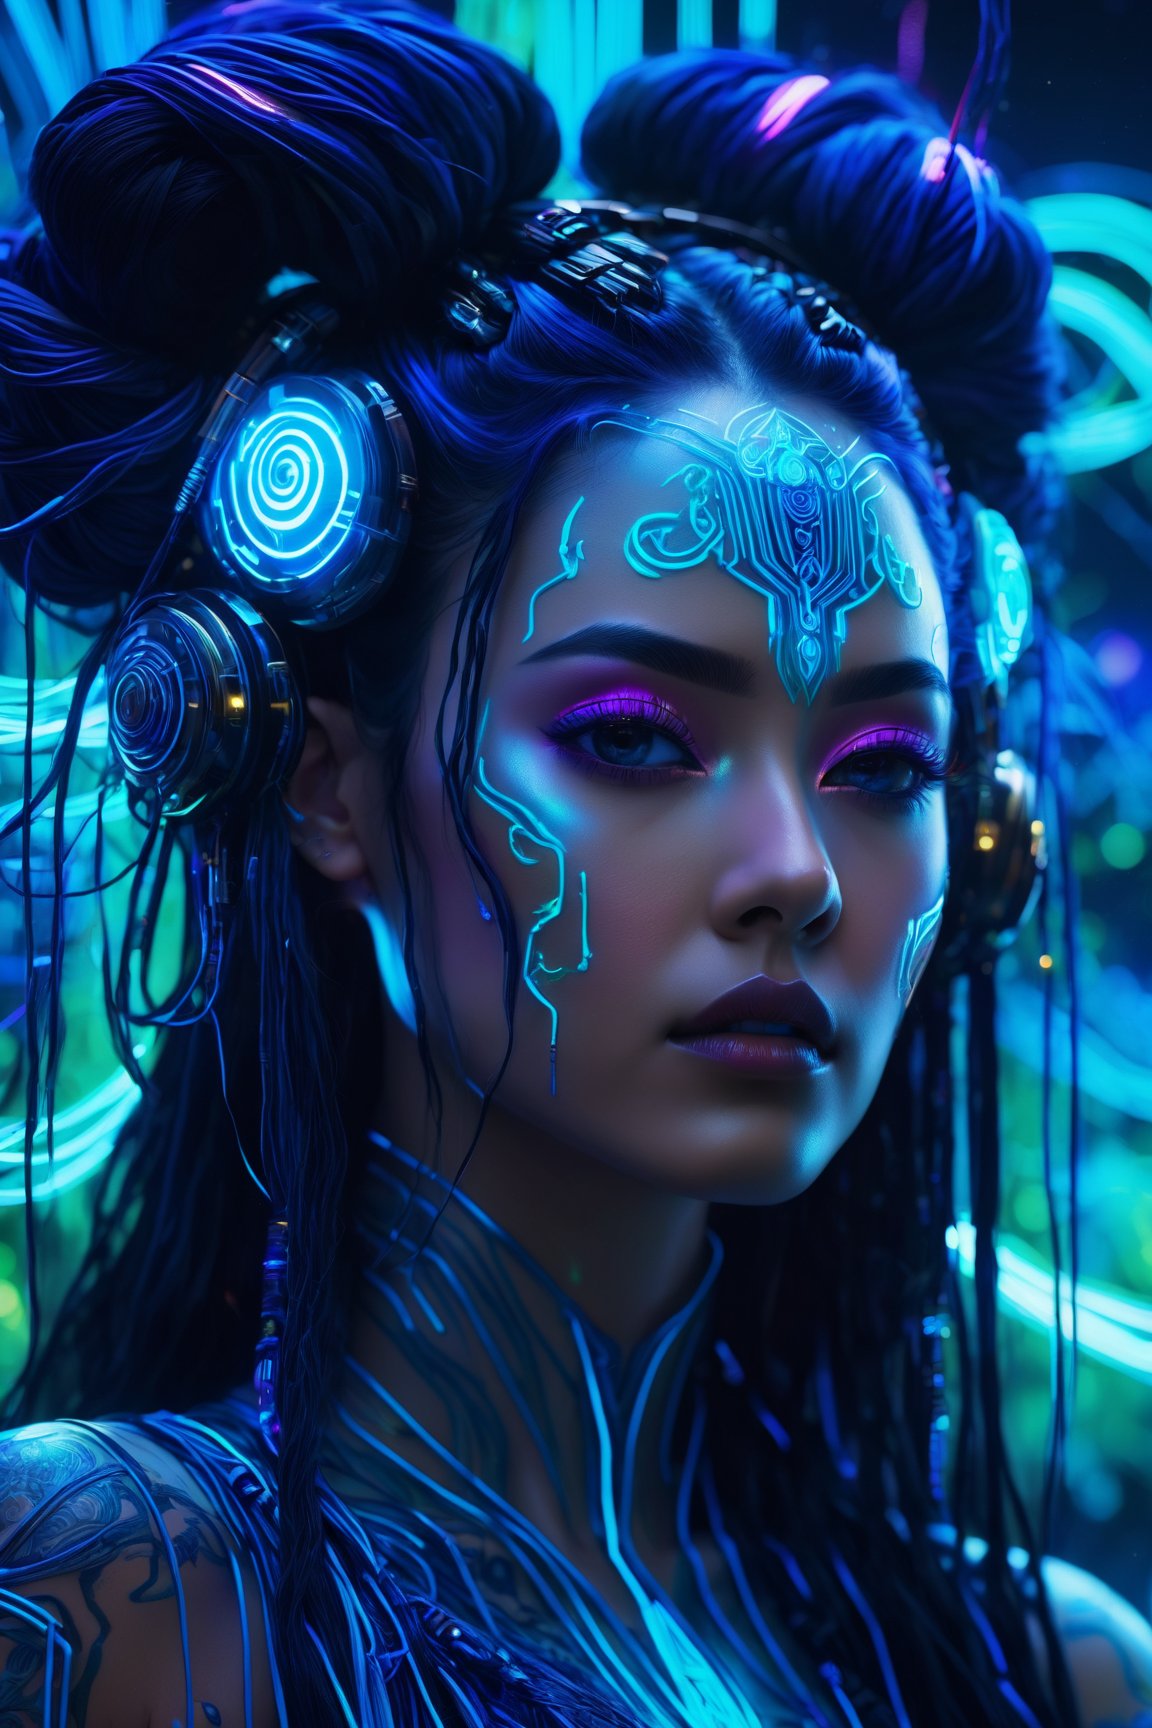 (best quality, 8K, highres, masterpiece), ultra-detailed, cyberpunk woman adorned with long black hair fashioned into space buns. In this ethereal scene, she embodies the role of the goddess of horticulture, surrounded by millions of microscopic, ultra-bright blue neon strings emanating from her form. composition showcases a stunningly beautiful backlit silhouette, intricately detailed and adorned with neon clouds, creating a mesmerizing and vivid blue color palette, Realism